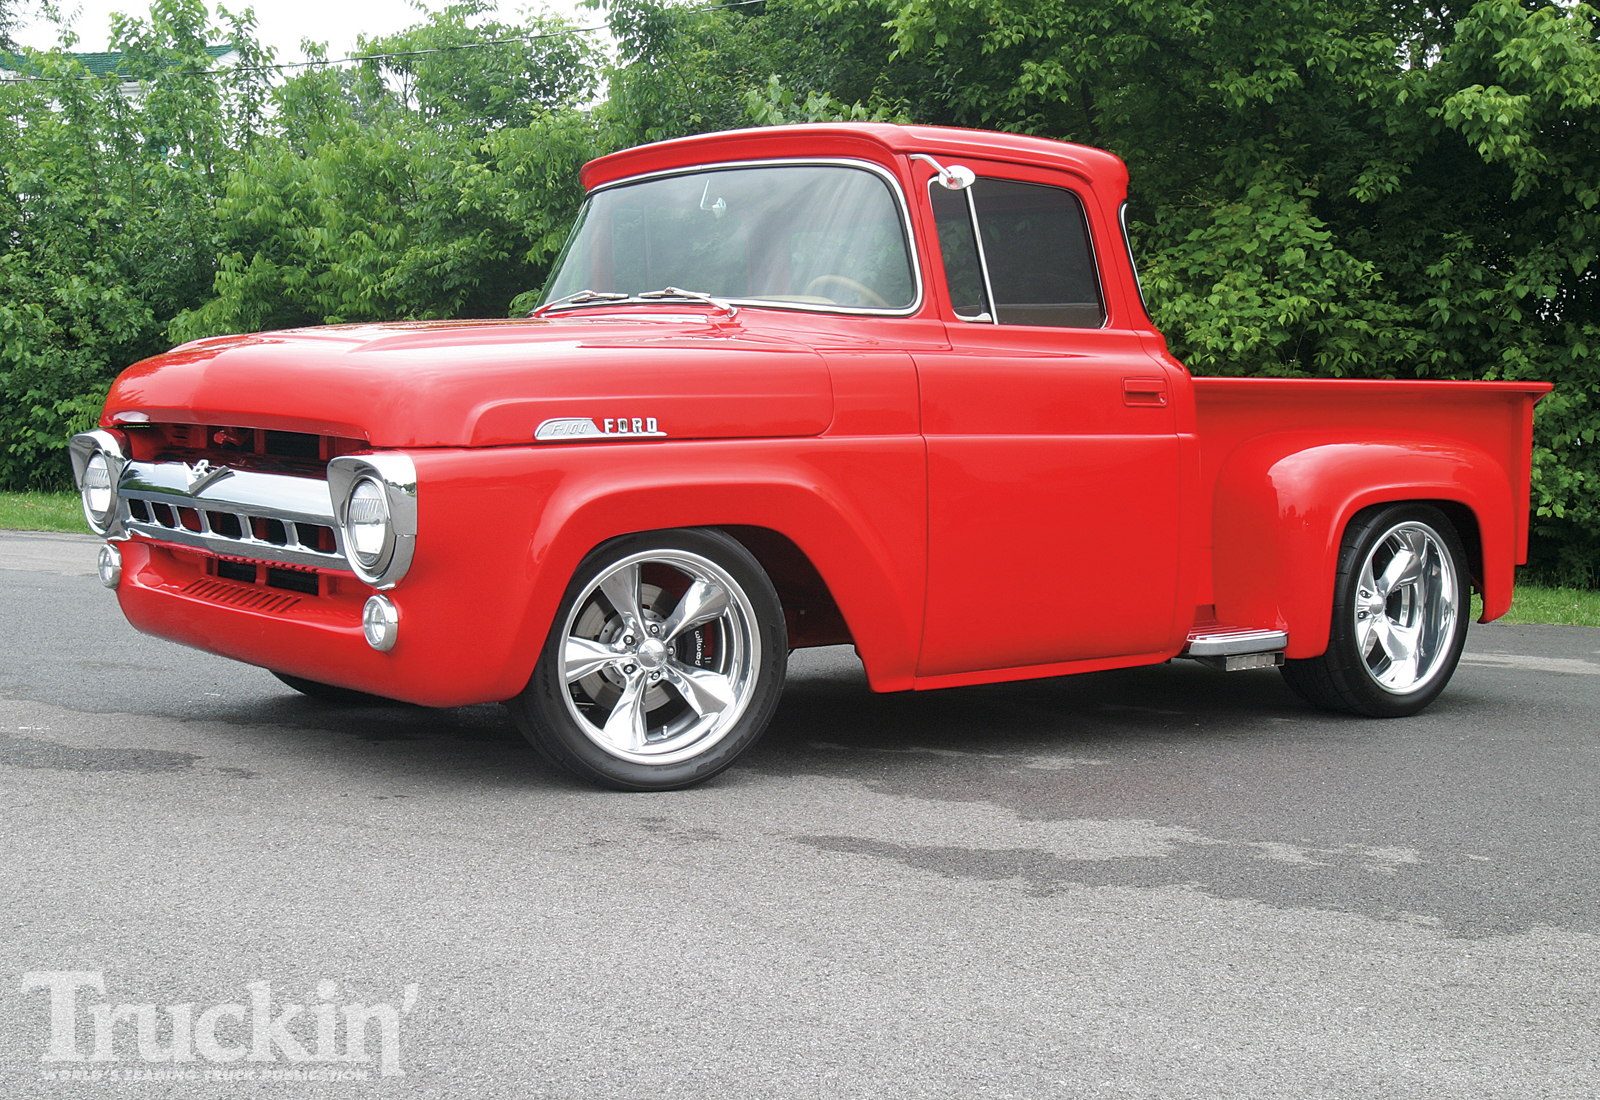 Images of 1957 Ford F-100 | 1600x1100